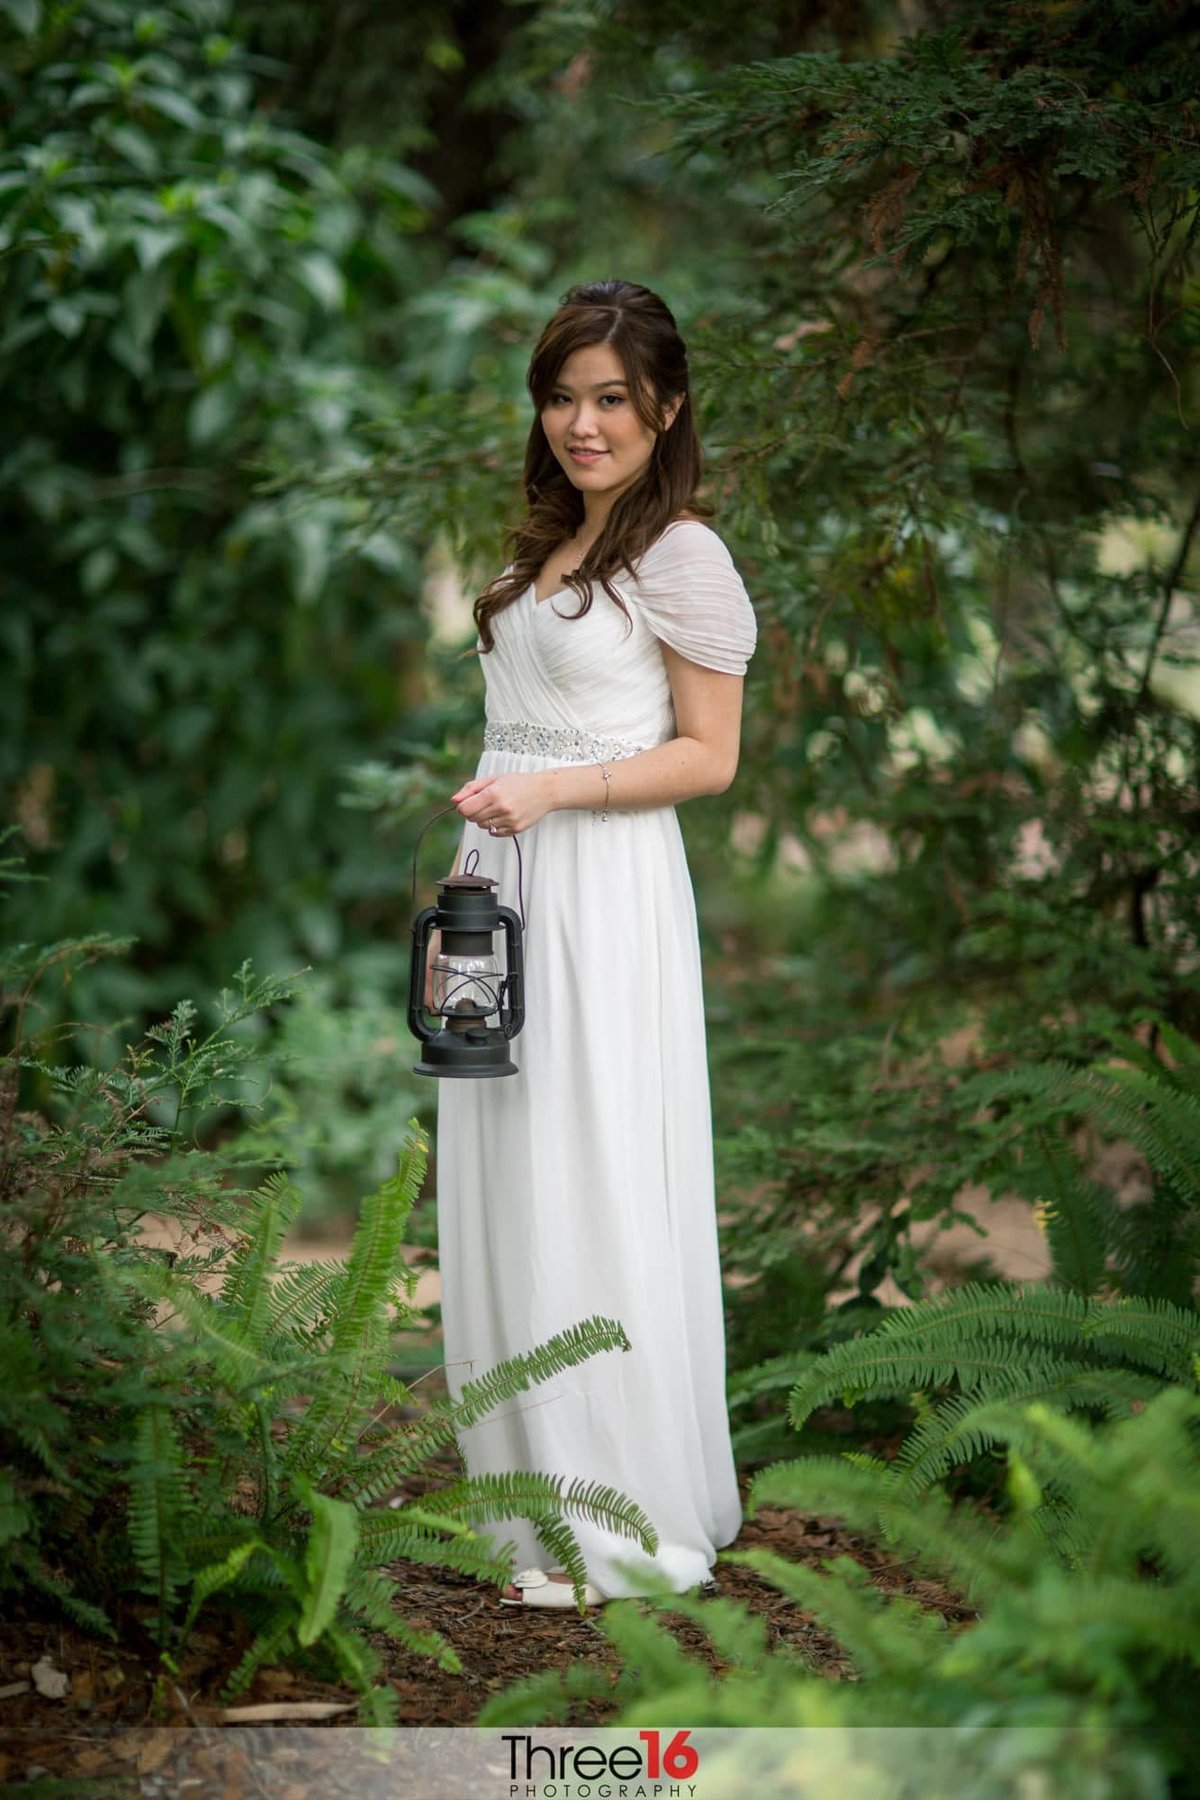 Bride poses for photos amongst the green shrubs of the Los Angeles Arboretum holding a train-style lamp